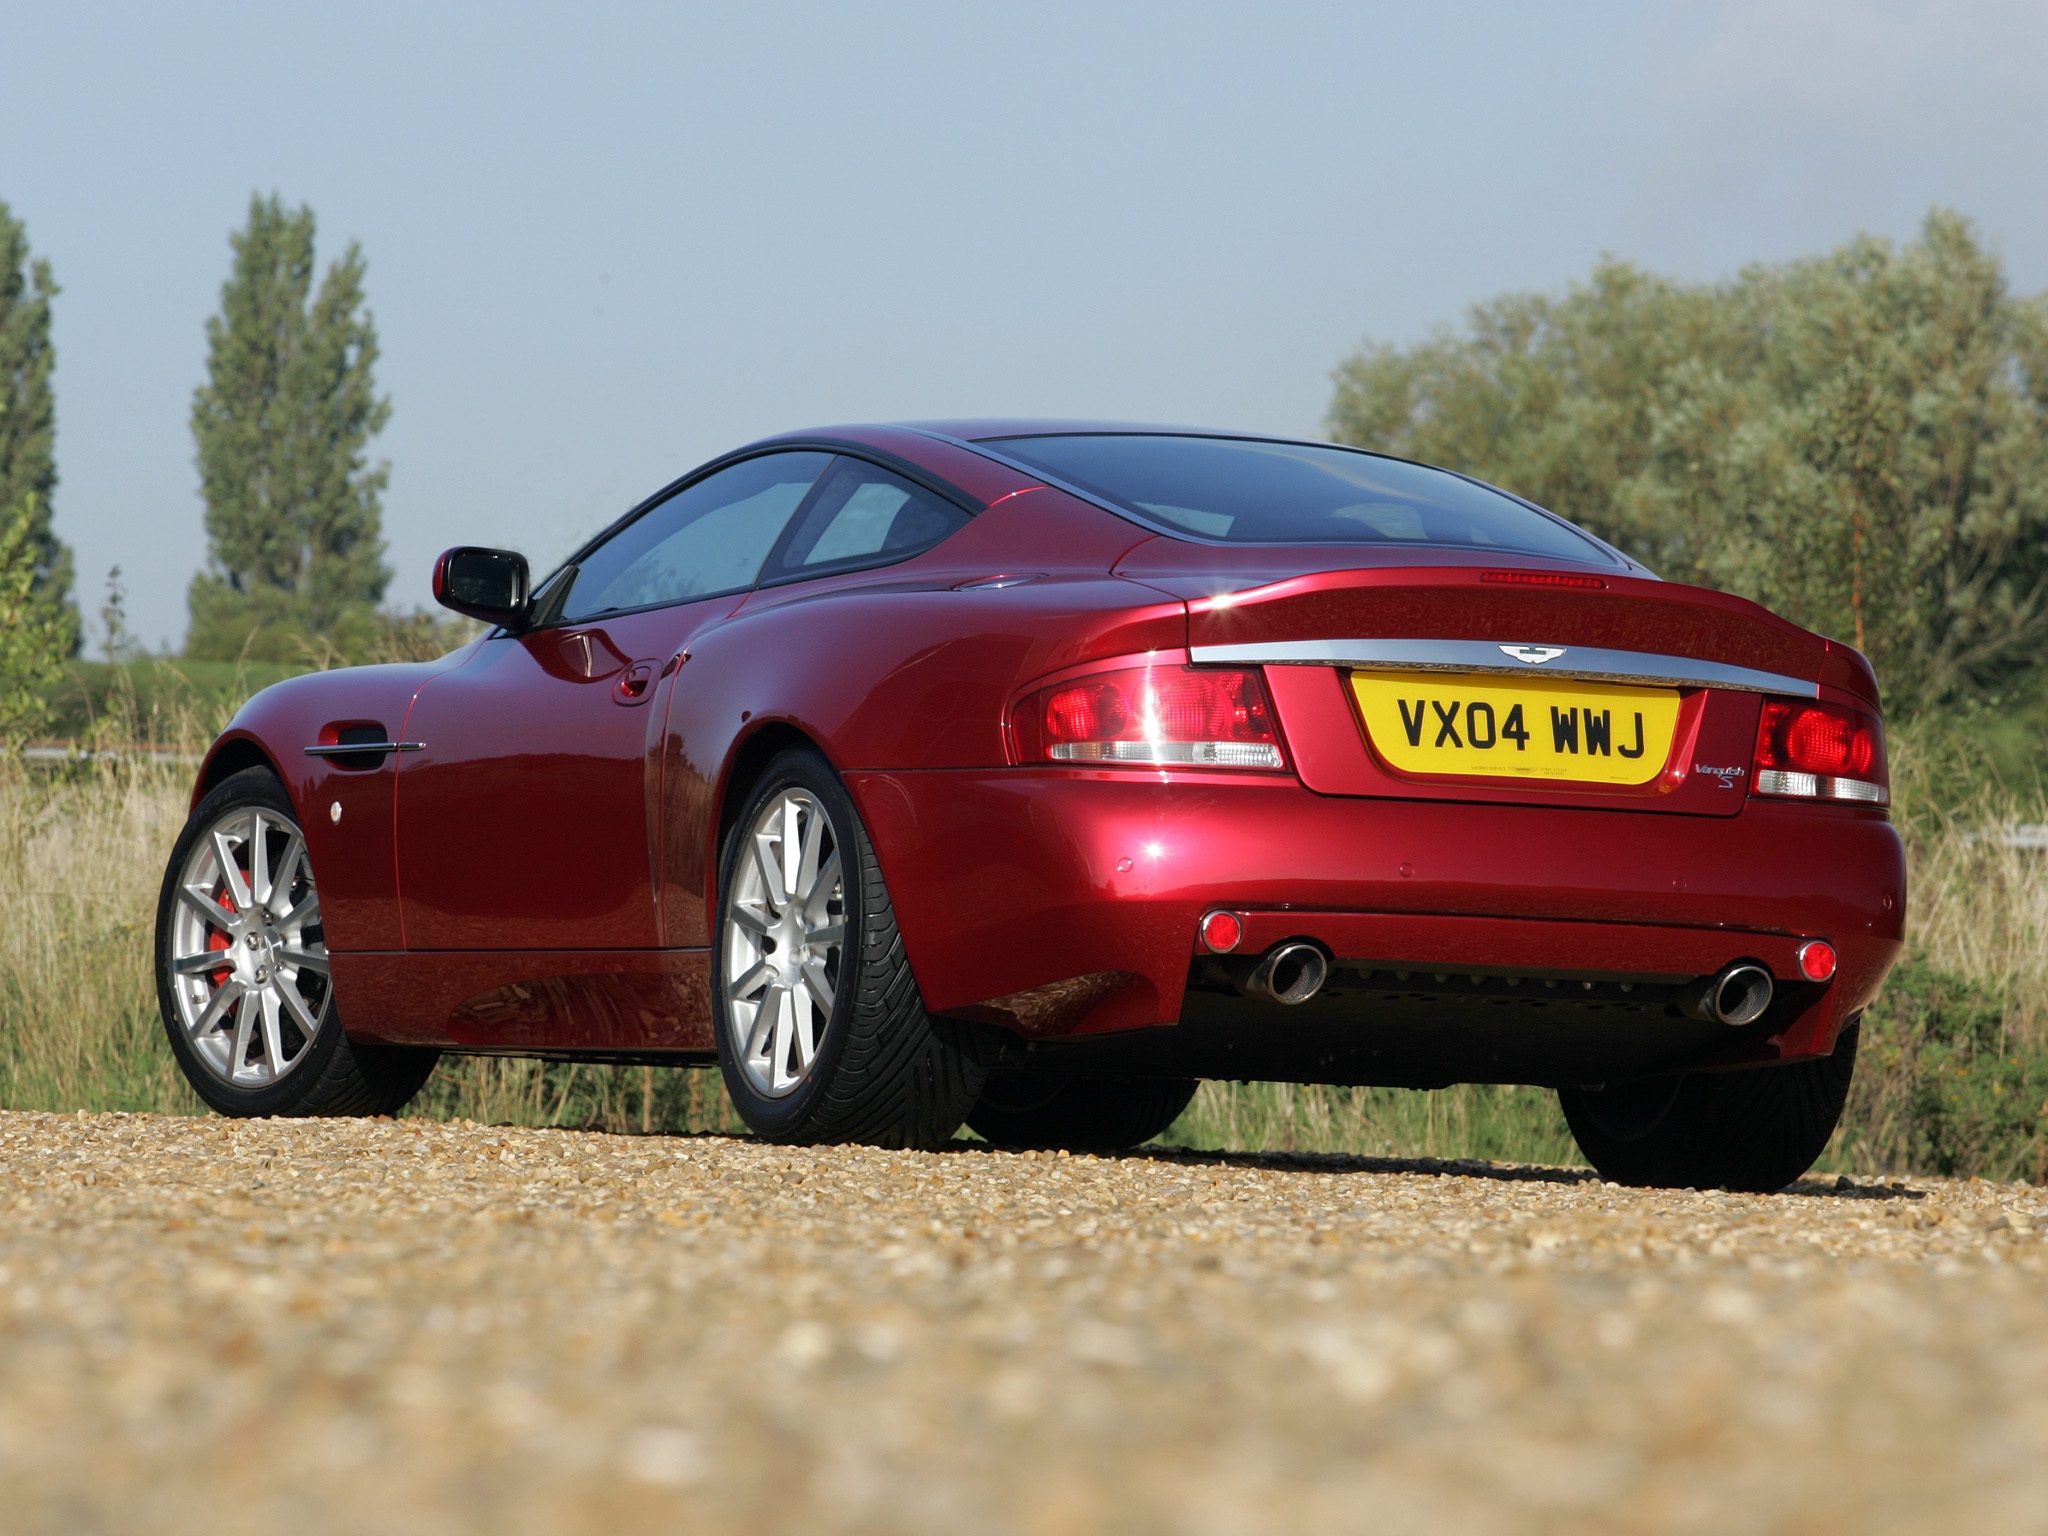 cars, nature, aston martin, red, back view, rear view, style, 2004, v12, vanquish lock screen backgrounds